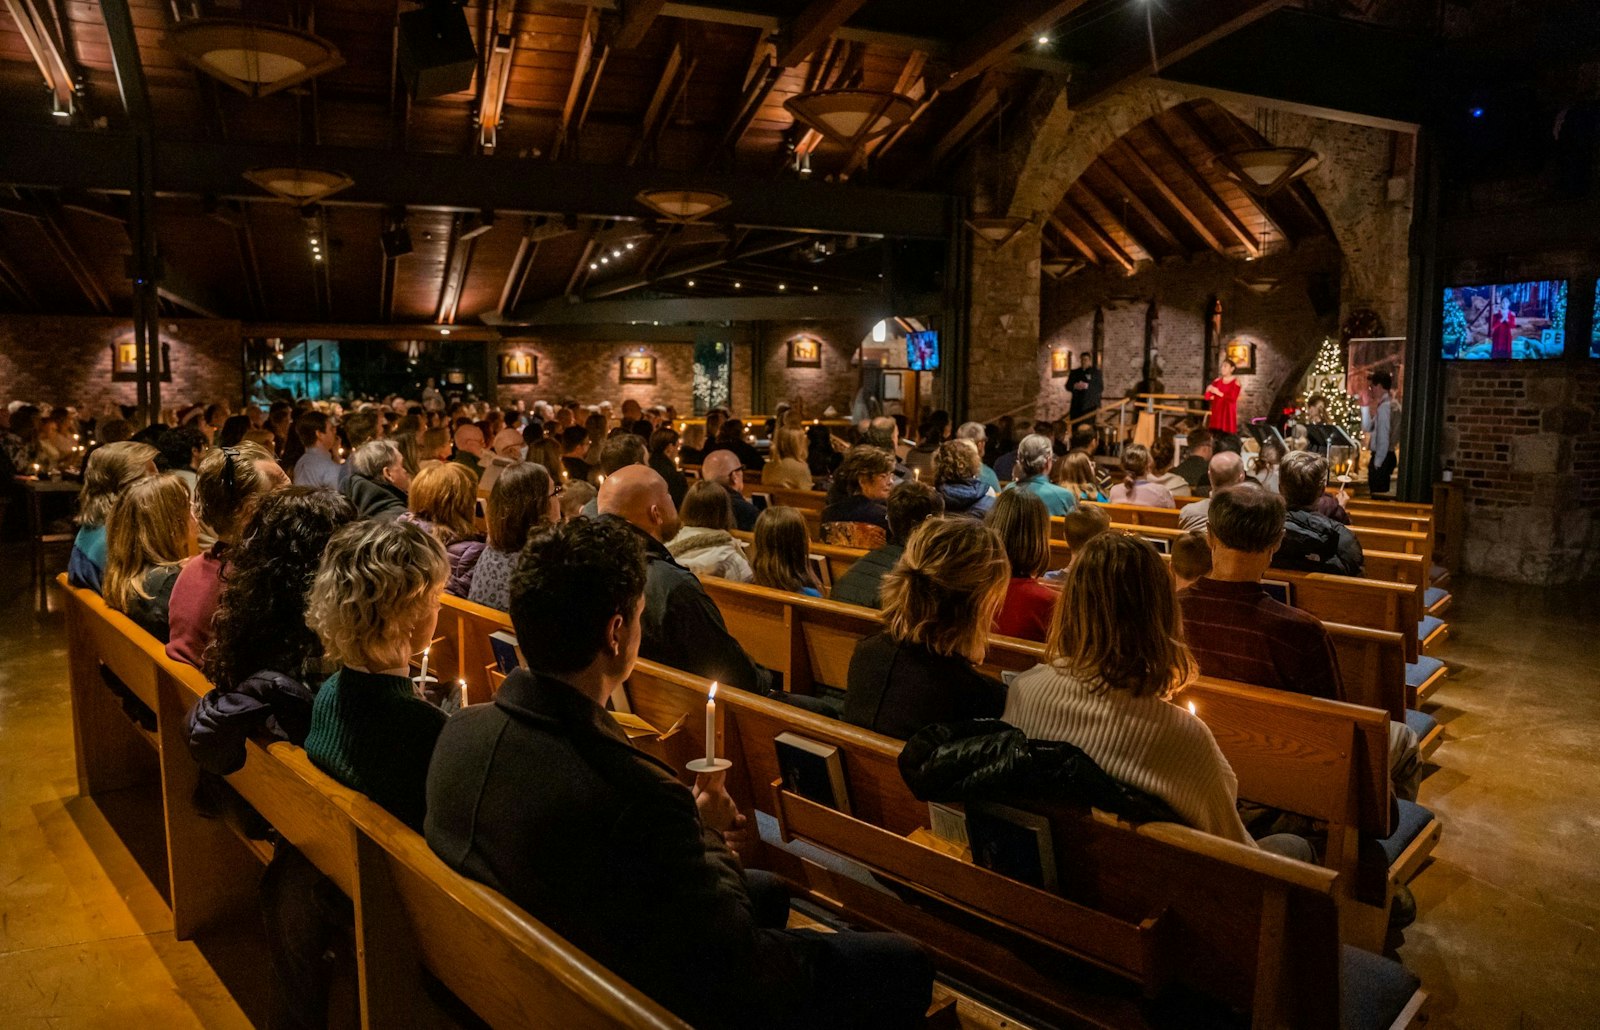 St. Joseph Parish in Lake Orion is filled for a Christmas concert, which was led by students of the parish, Fr. Kean said, many of whom were personally impacted by the Nov. 30 tragedy at Oxford High School. (Valaurian Waller | Detroit Catholic)